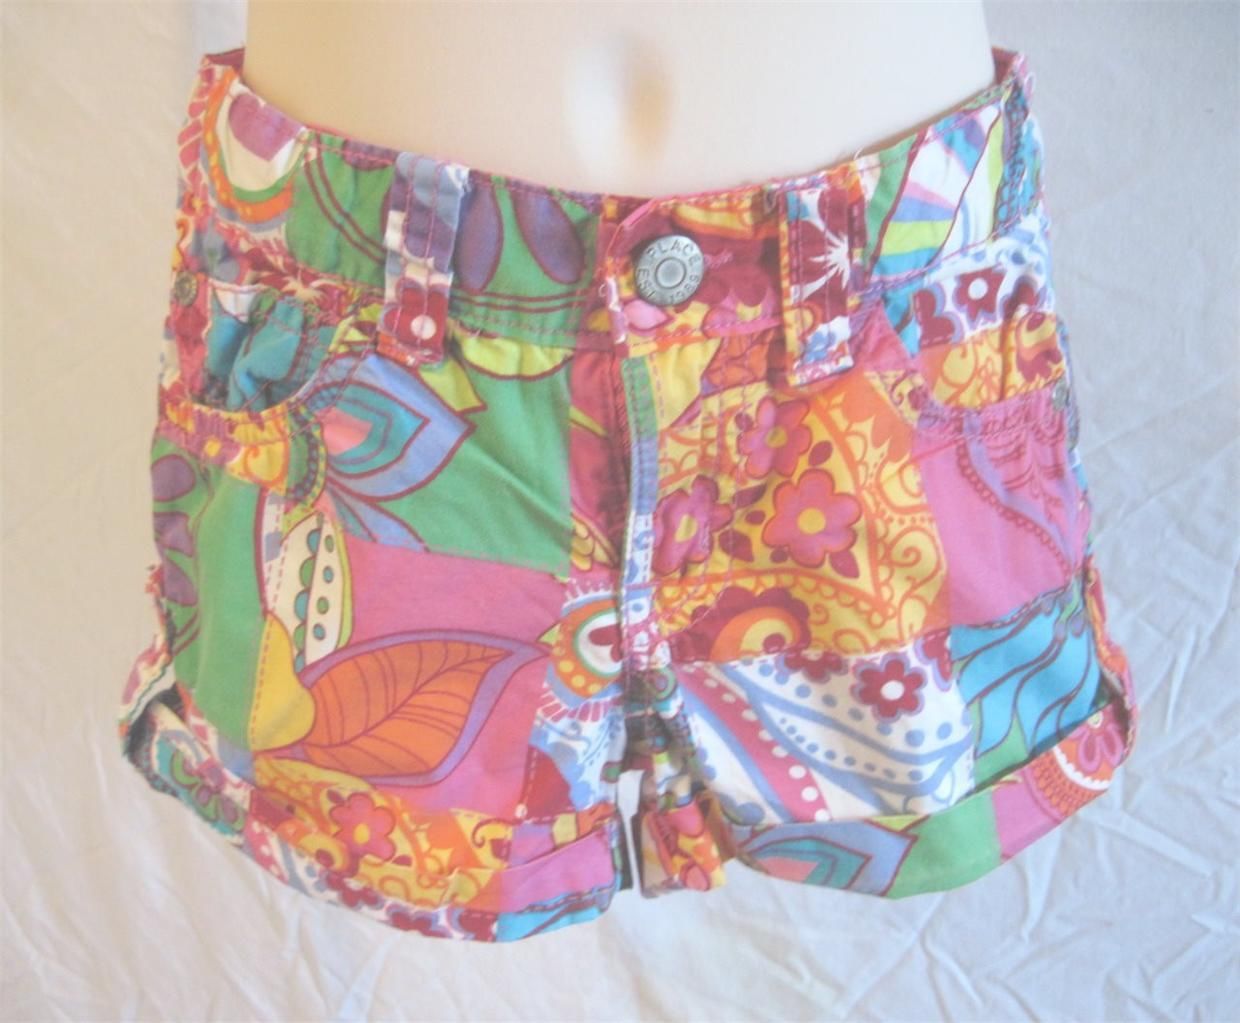 The Children's Place Bright  Mult-color Shorts  Cotton 5 Pocket Girl's Size 5 - $7.73